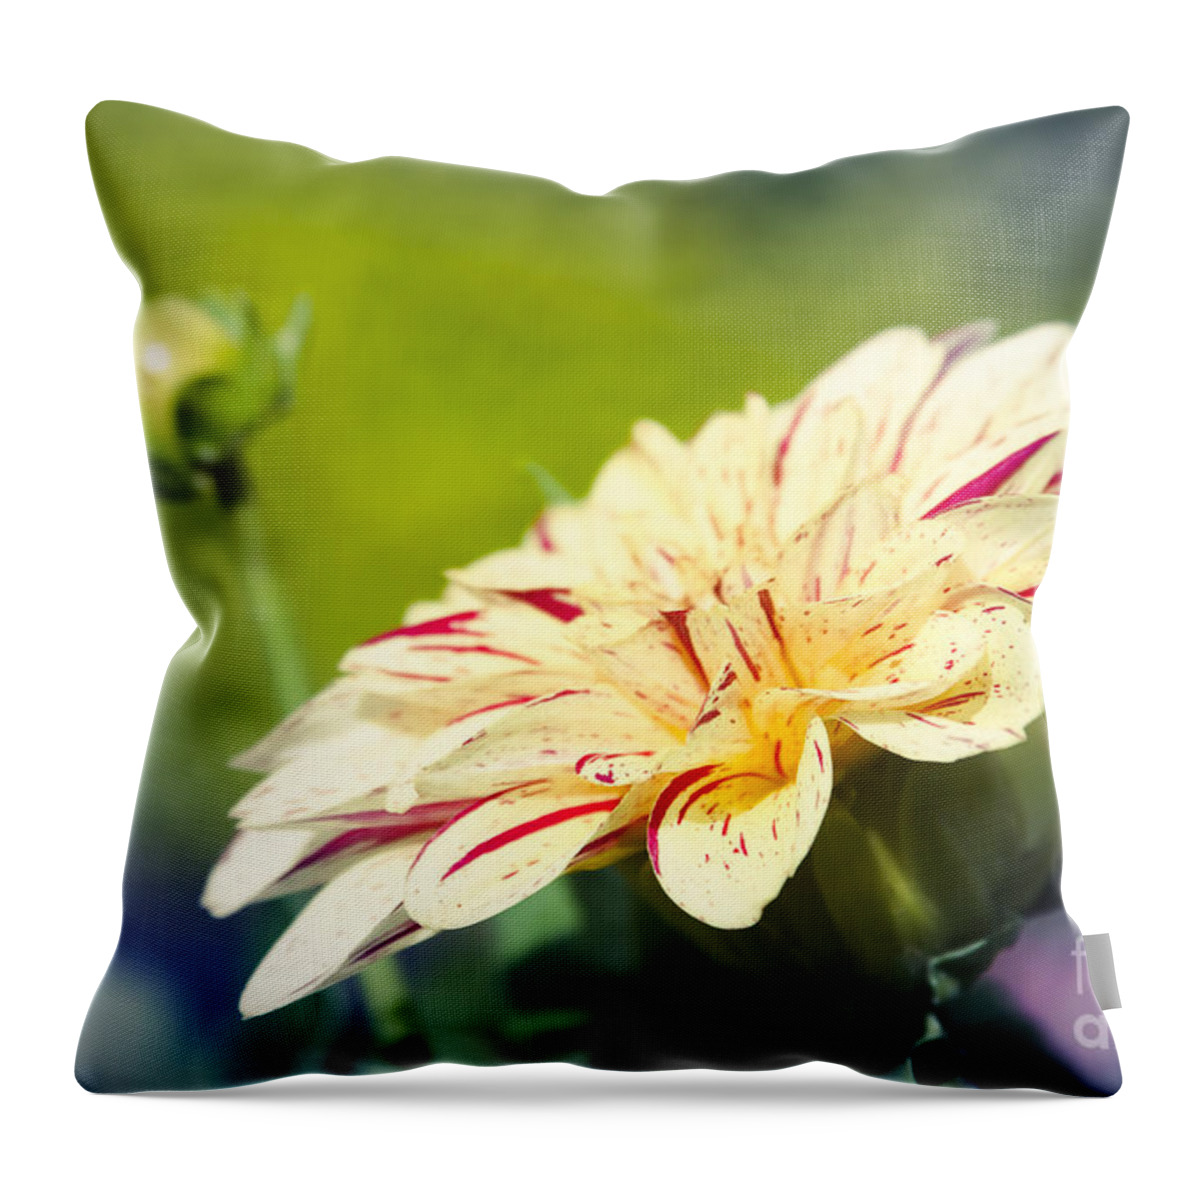 Flowers Throw Pillow featuring the photograph Spring Dream Jewel Tones by Sharon Mau